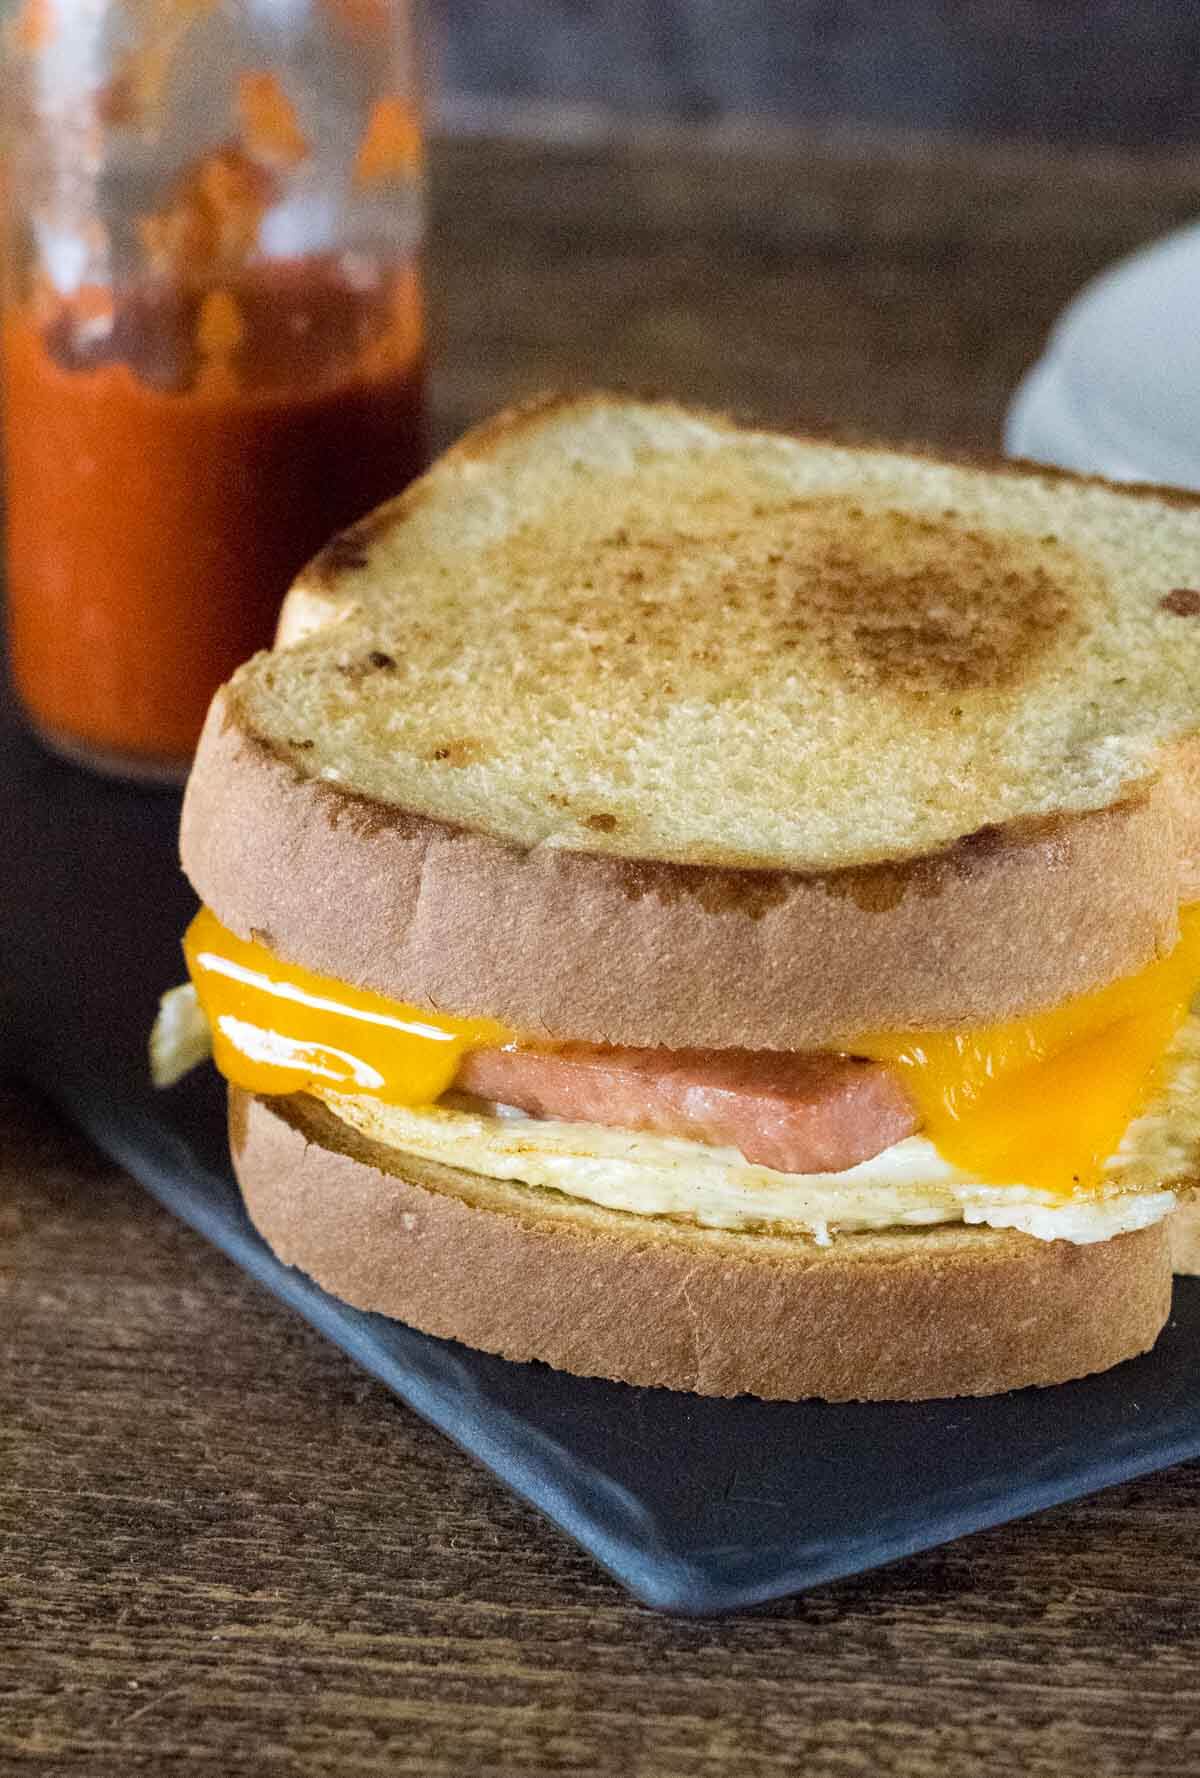 Spam and Egg Sandwich with hot sauce bottle.